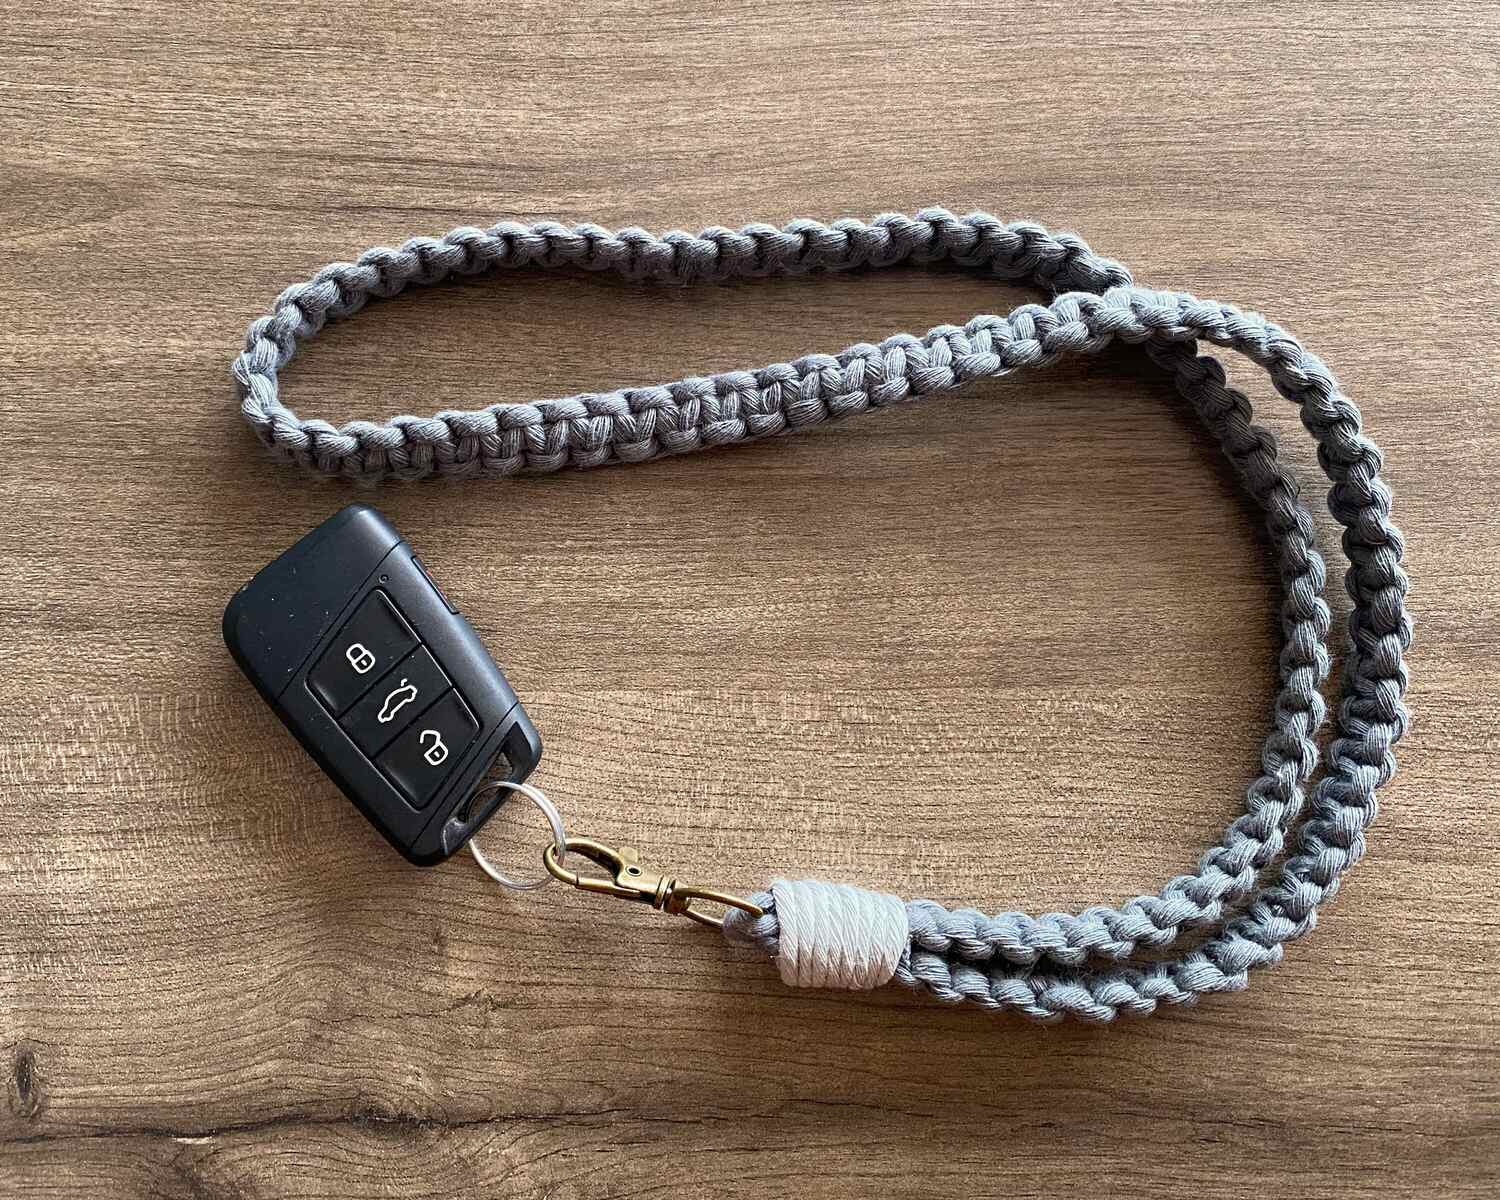 Crafting Intricate Lanyards With Macrame Techniques